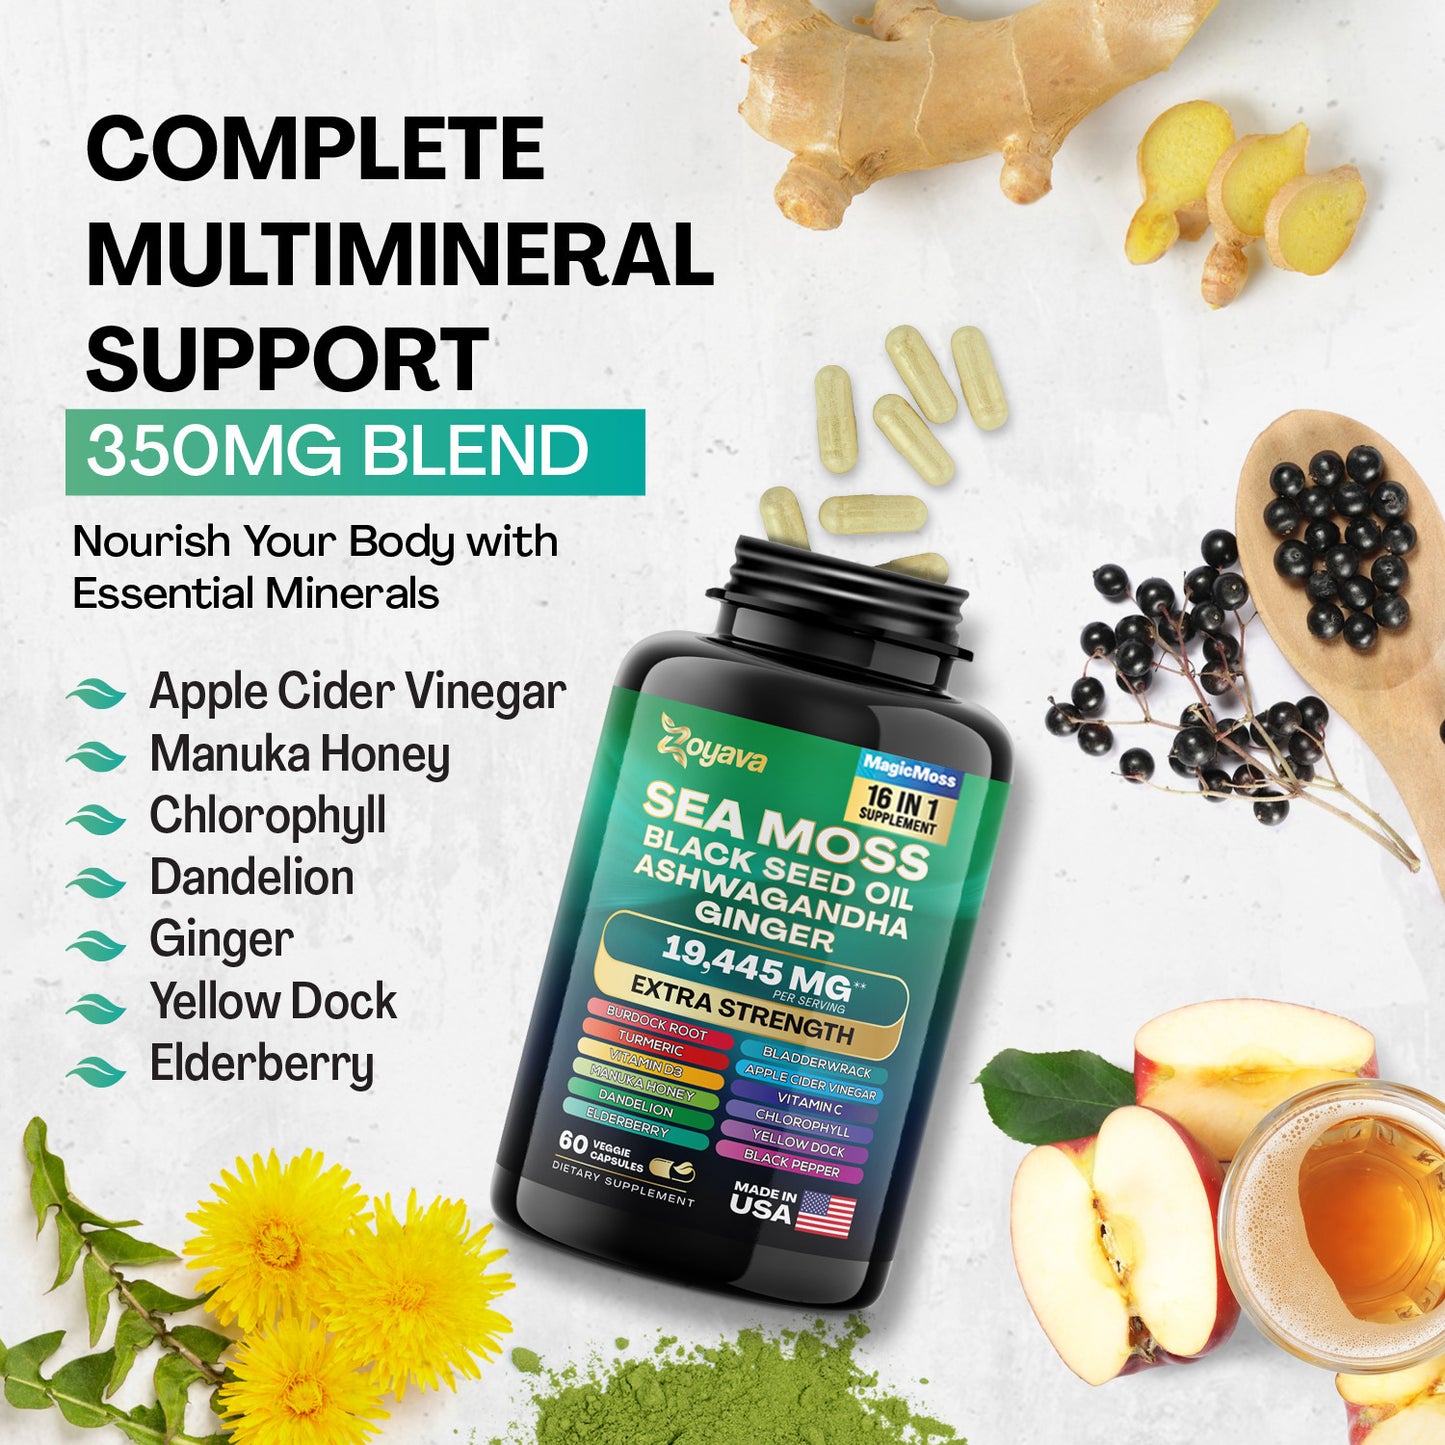 Sea Moss 16-in-1 for Total Wellness - Magic Moss Super Blend Capsules - 19,445MG Power!